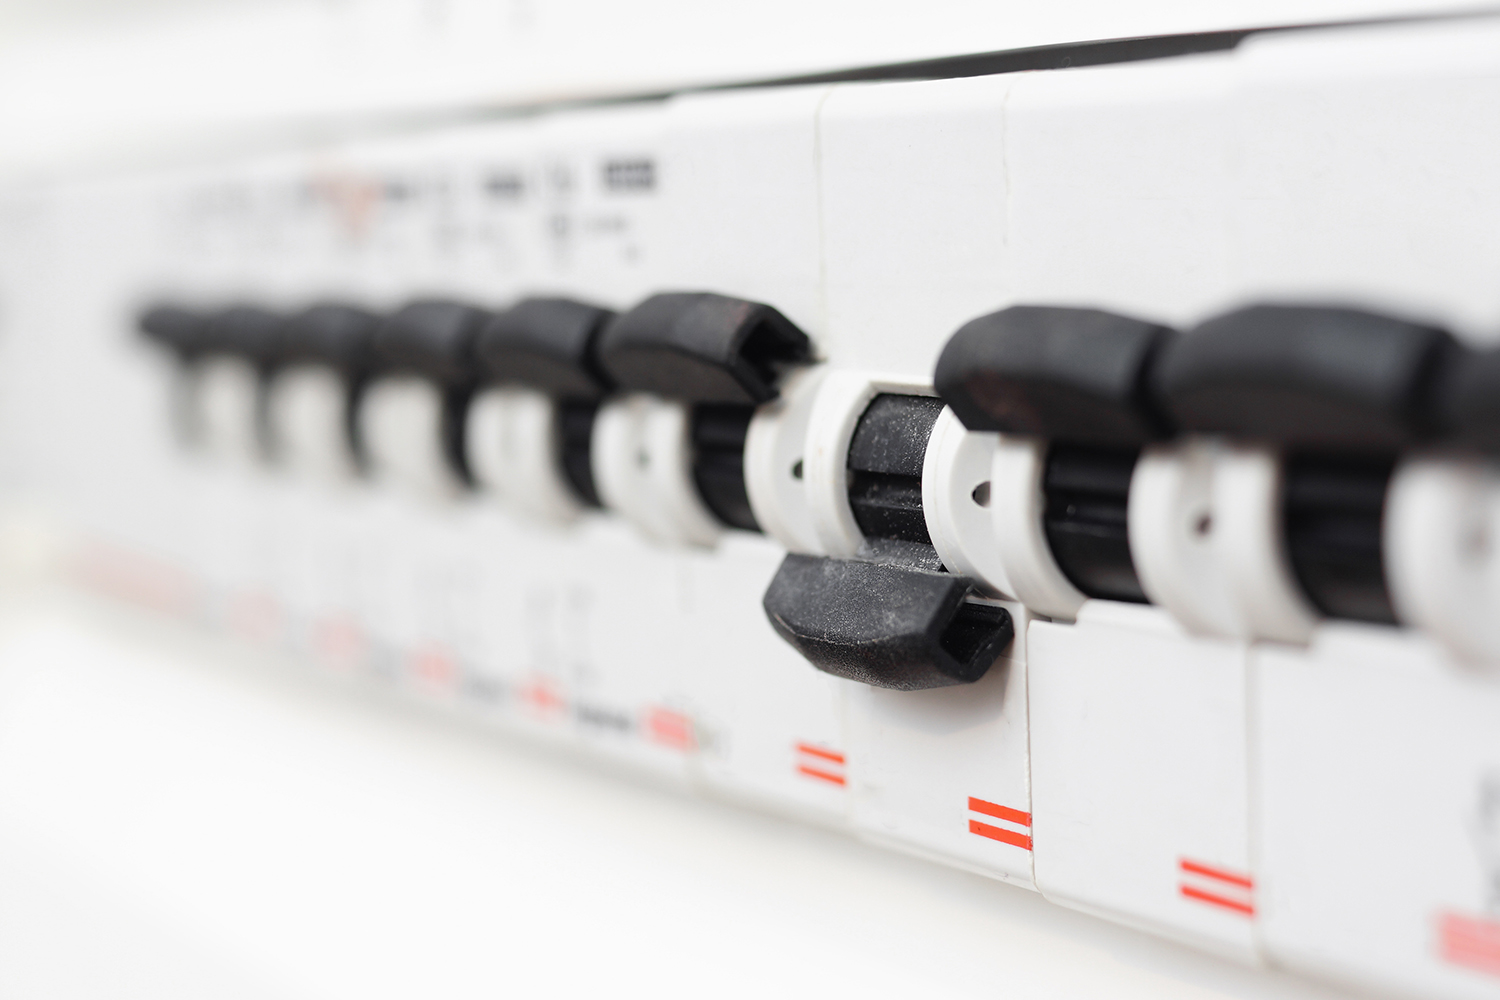 Electric switches